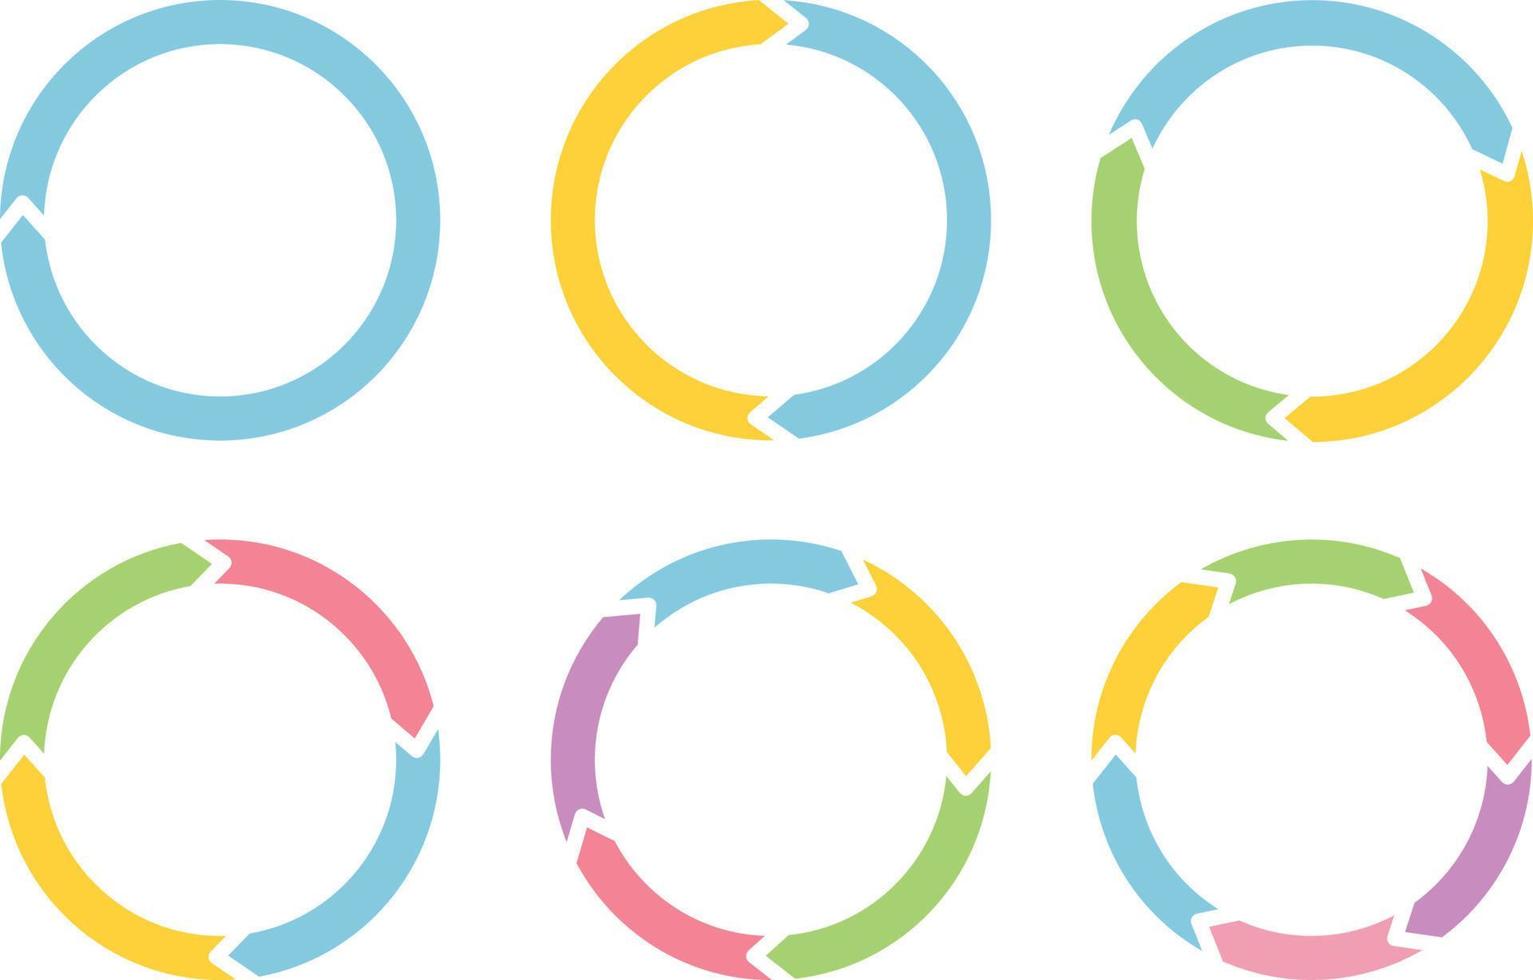 colorful Circle arrows set isolate on white background. vector